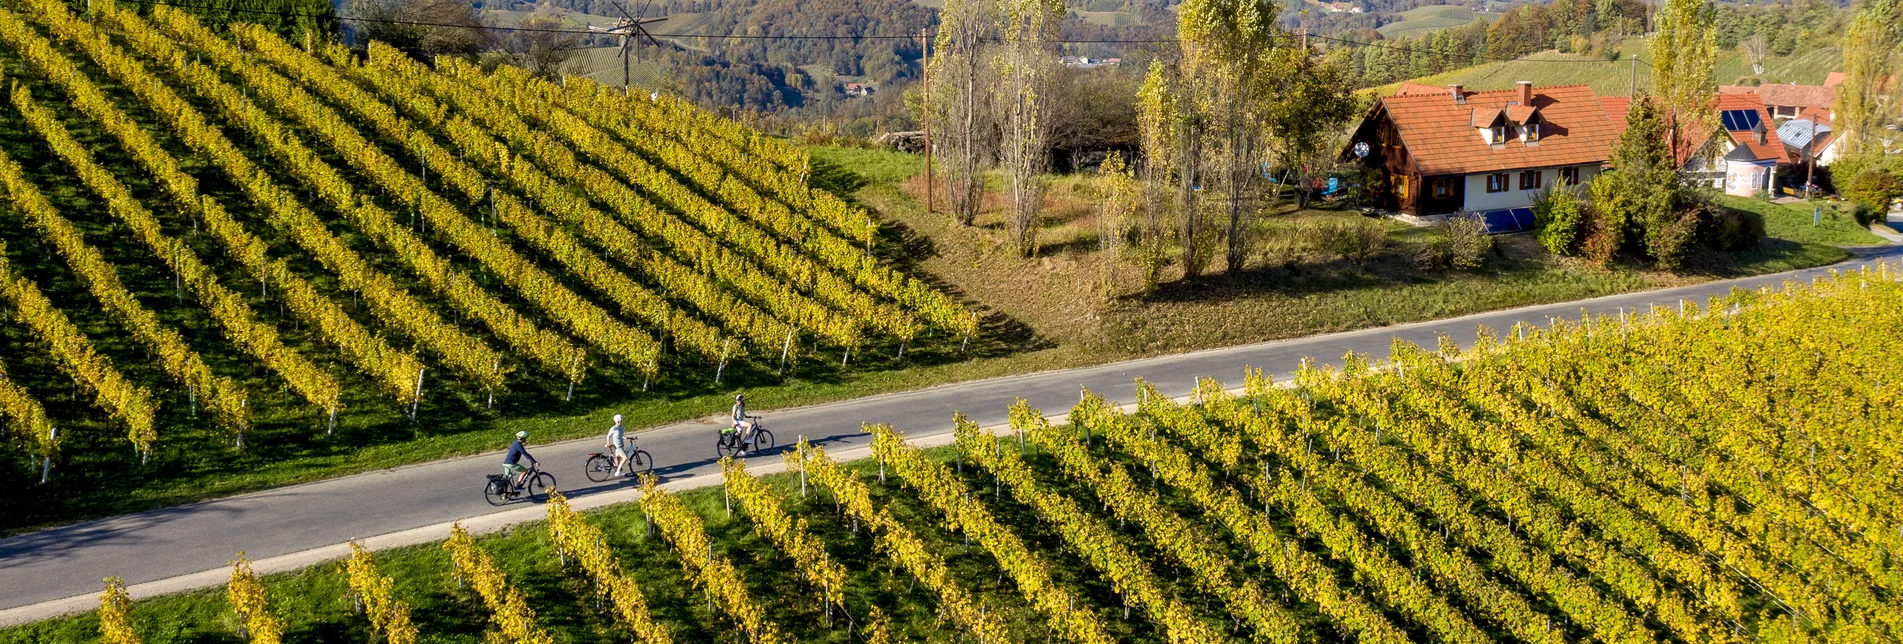 PackageStyrian Wine Country Route - 10 days - from/to Graz